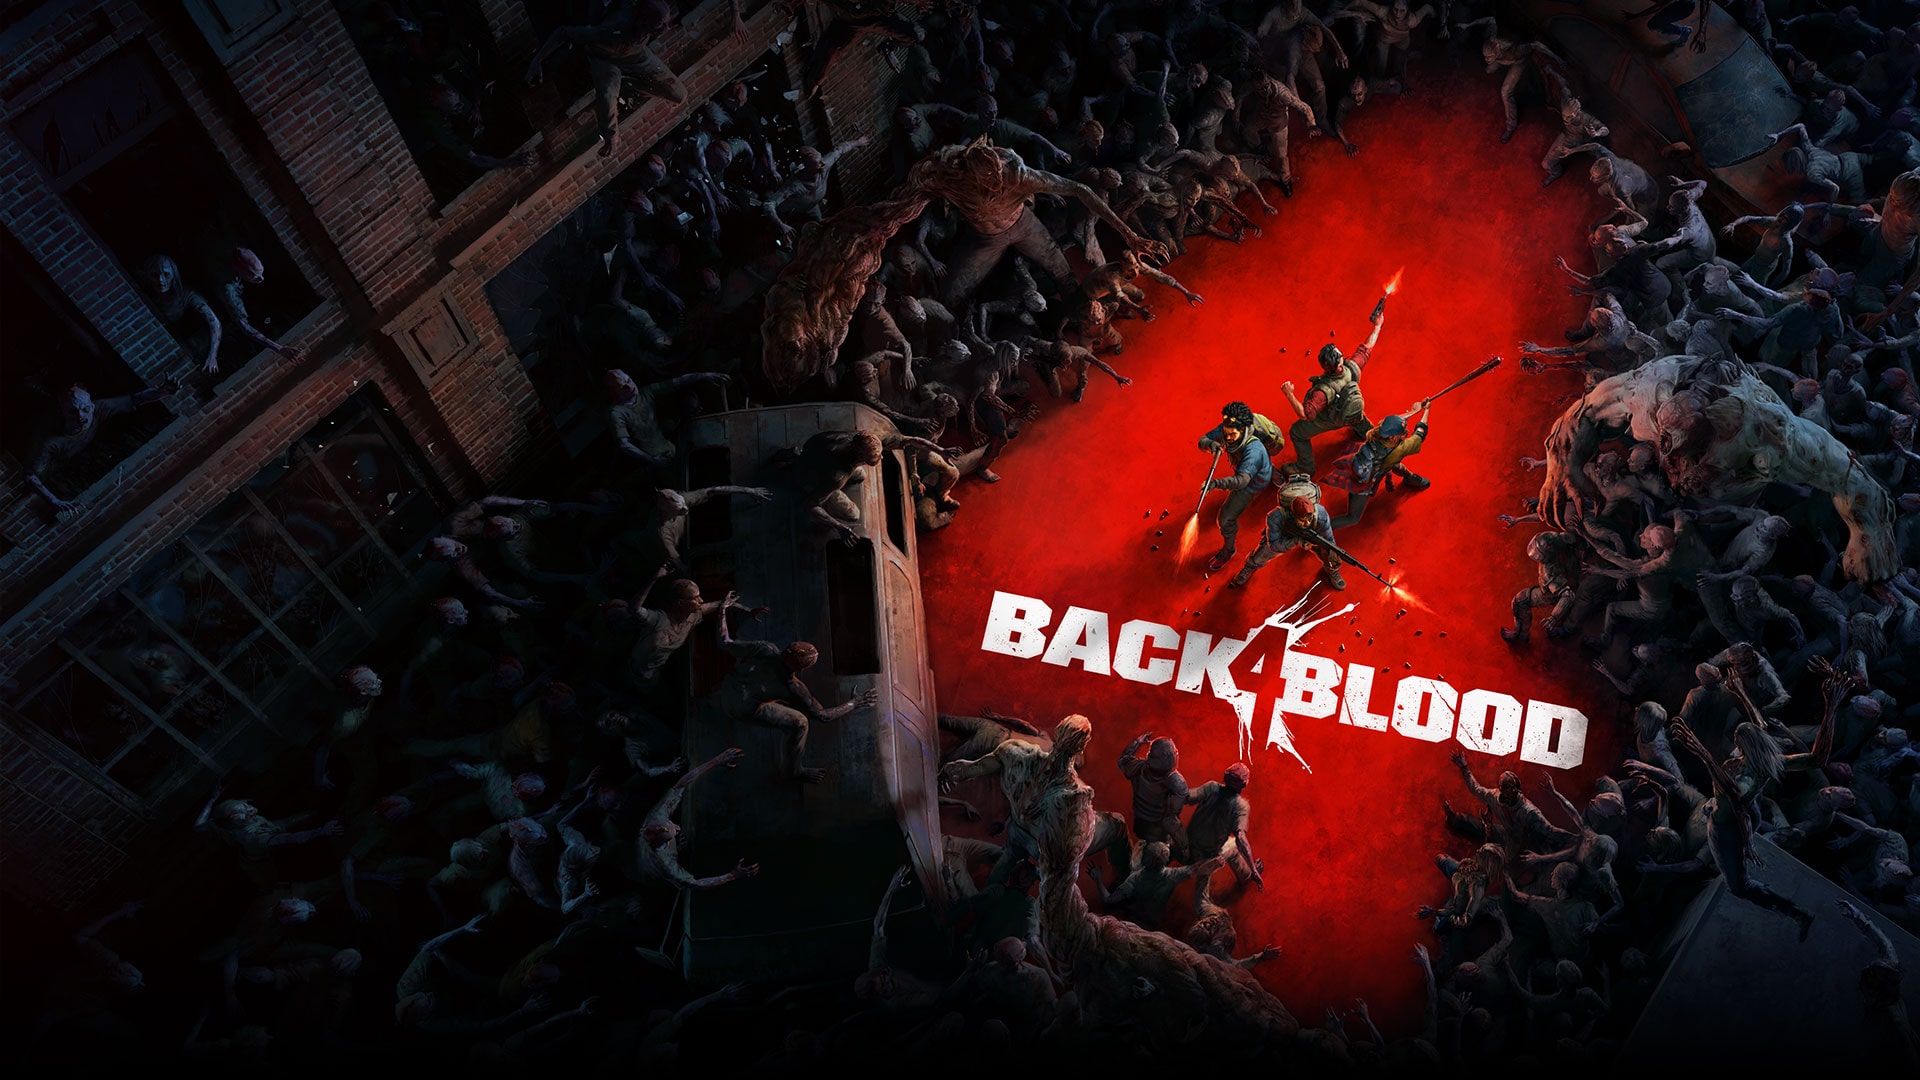 Have Back 4 Blood and Gotham Knights achieved commercial success?